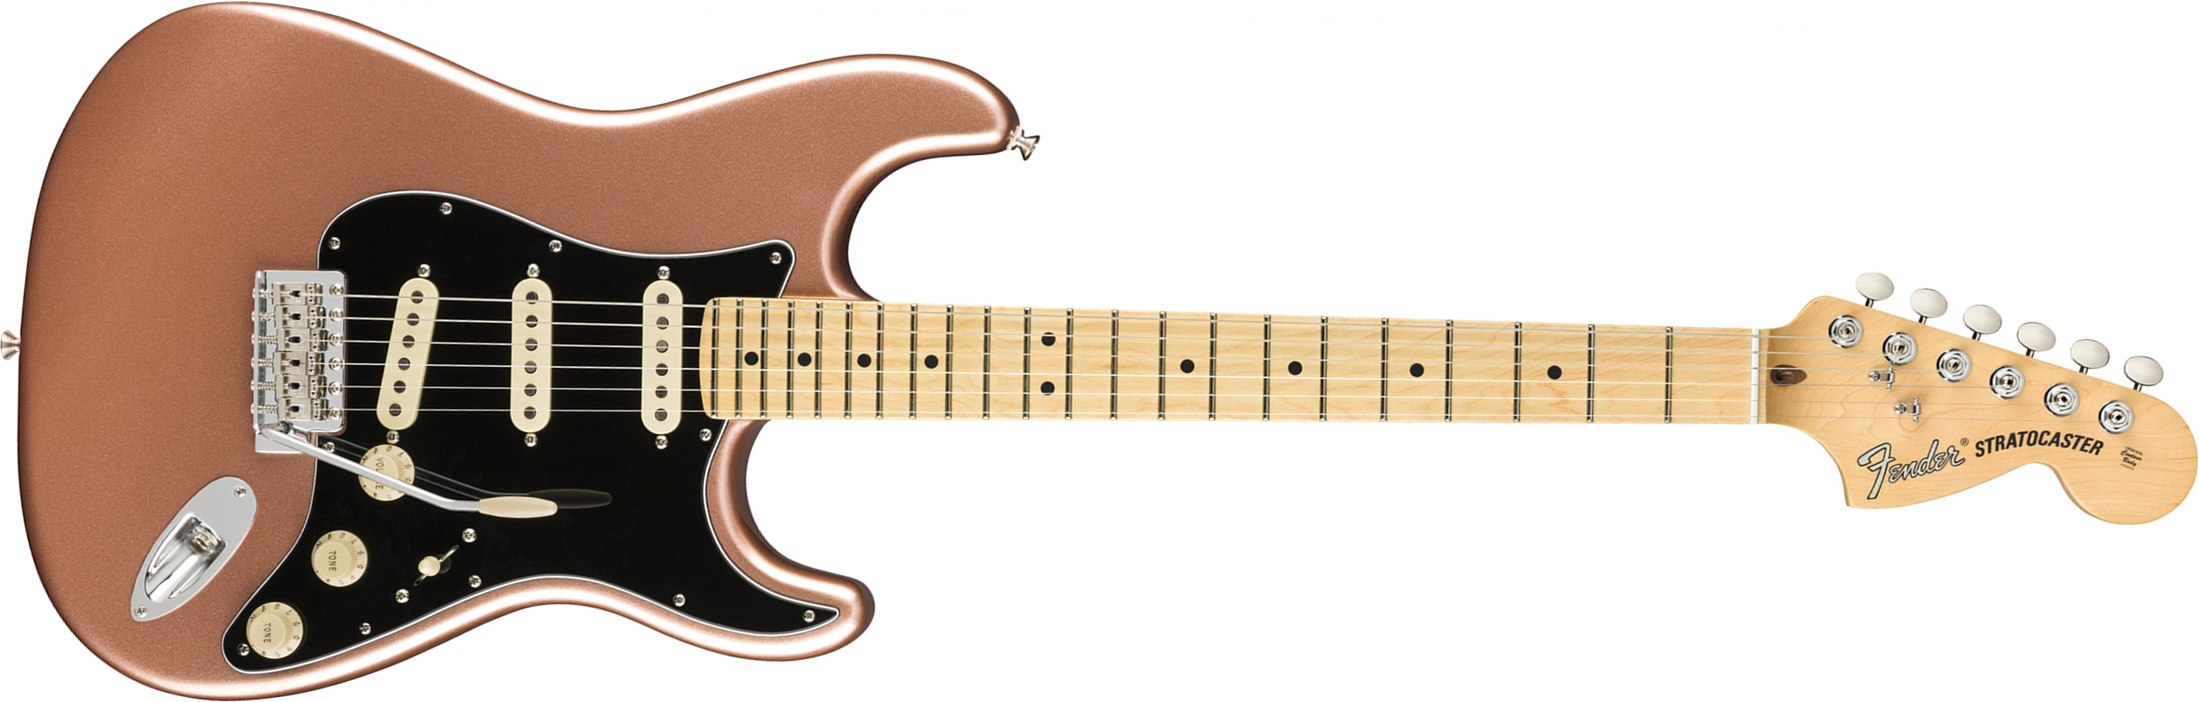 Fender Strat American Performer Usa Sss Mn - Penny - E-Gitarre in Str-Form - Main picture